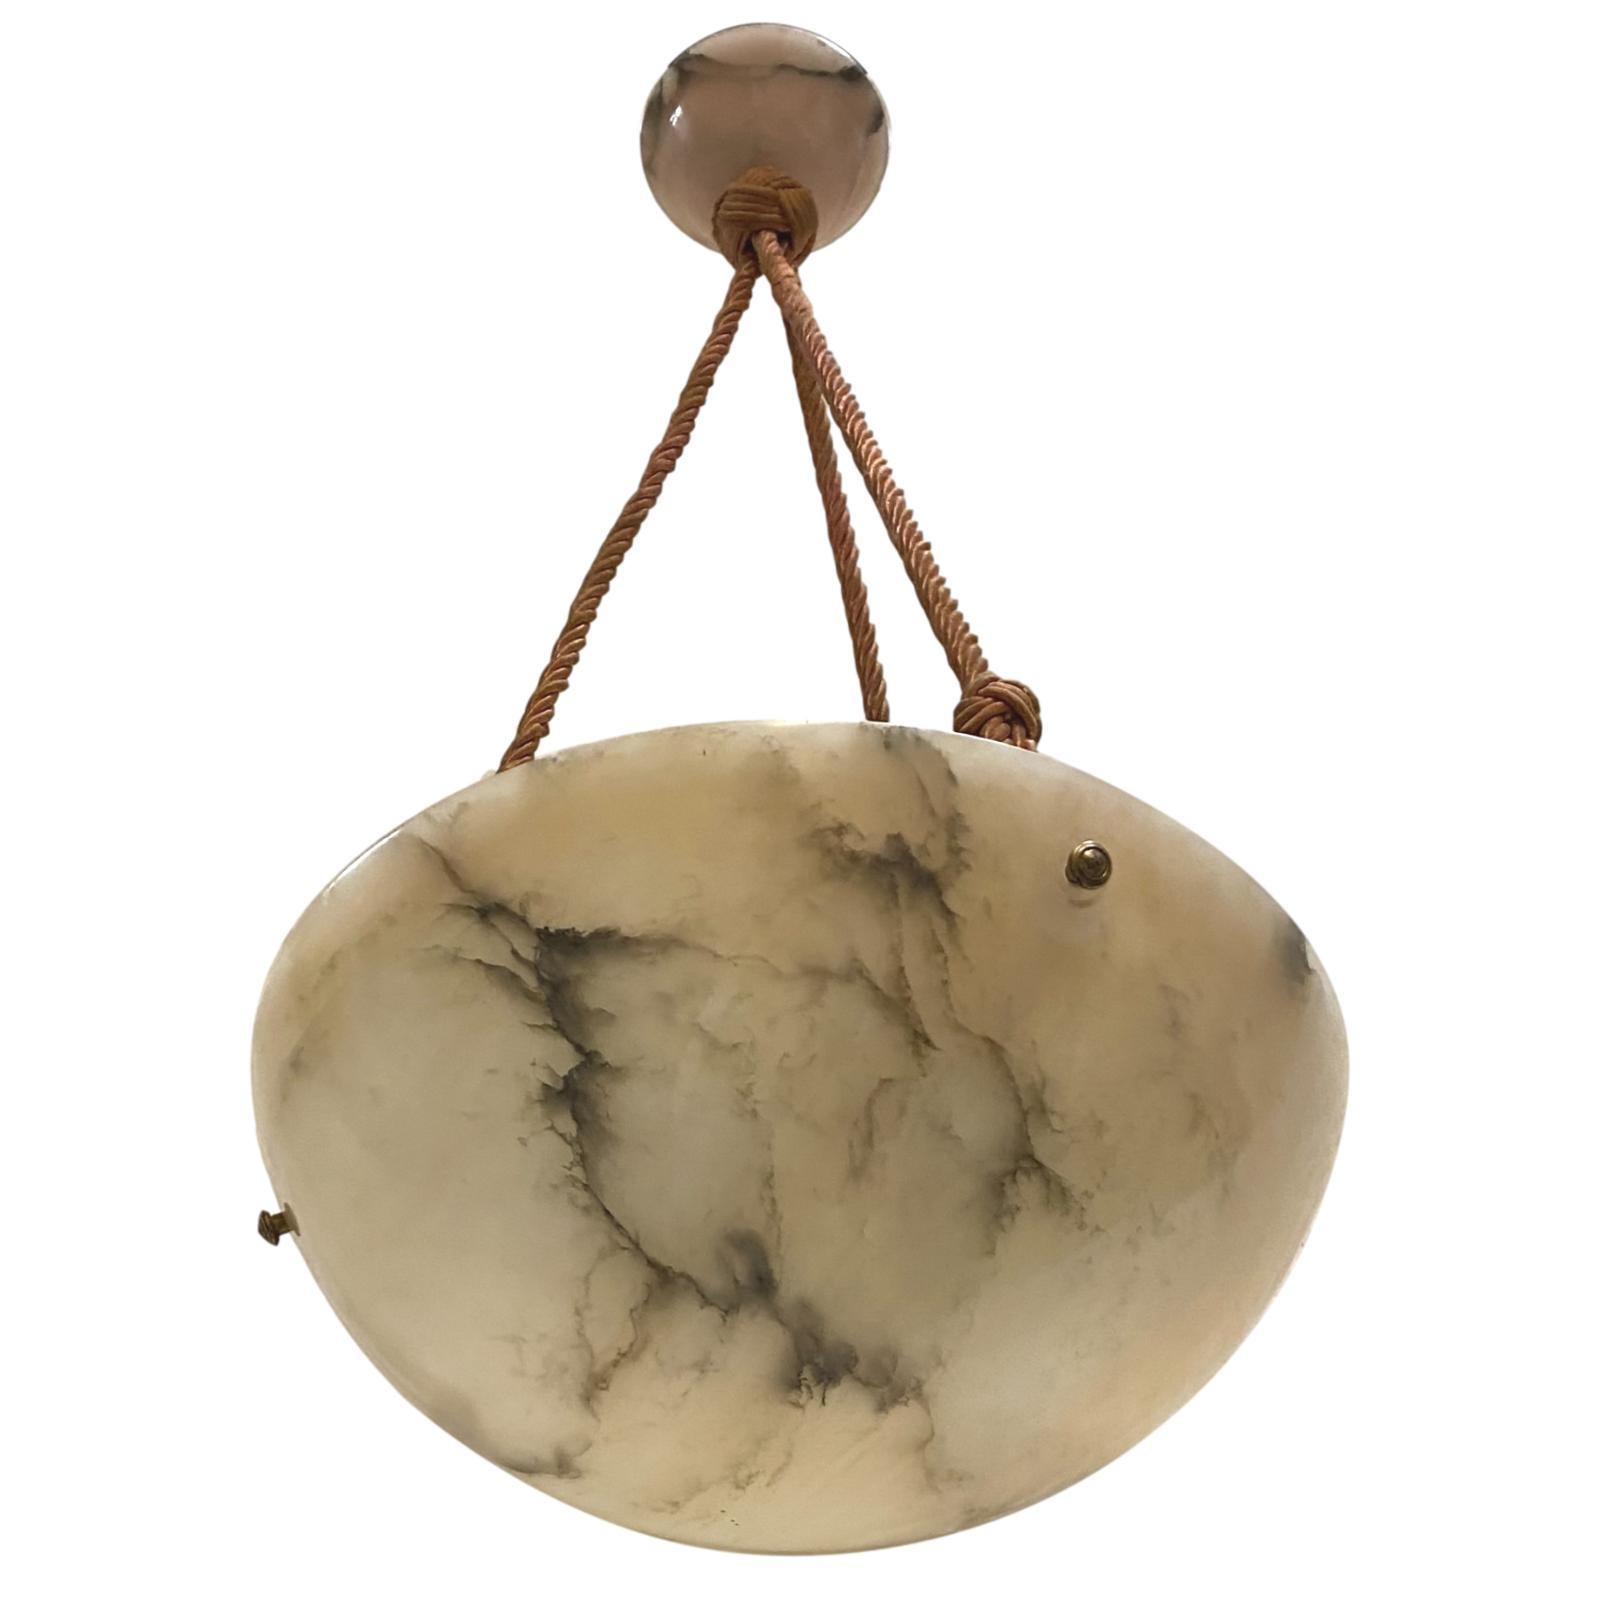 A circa 1920s hand carved Italian alabaster light fixture with silk cords but can be retro-fitted with chain.

Measurements:
Diameter: 14